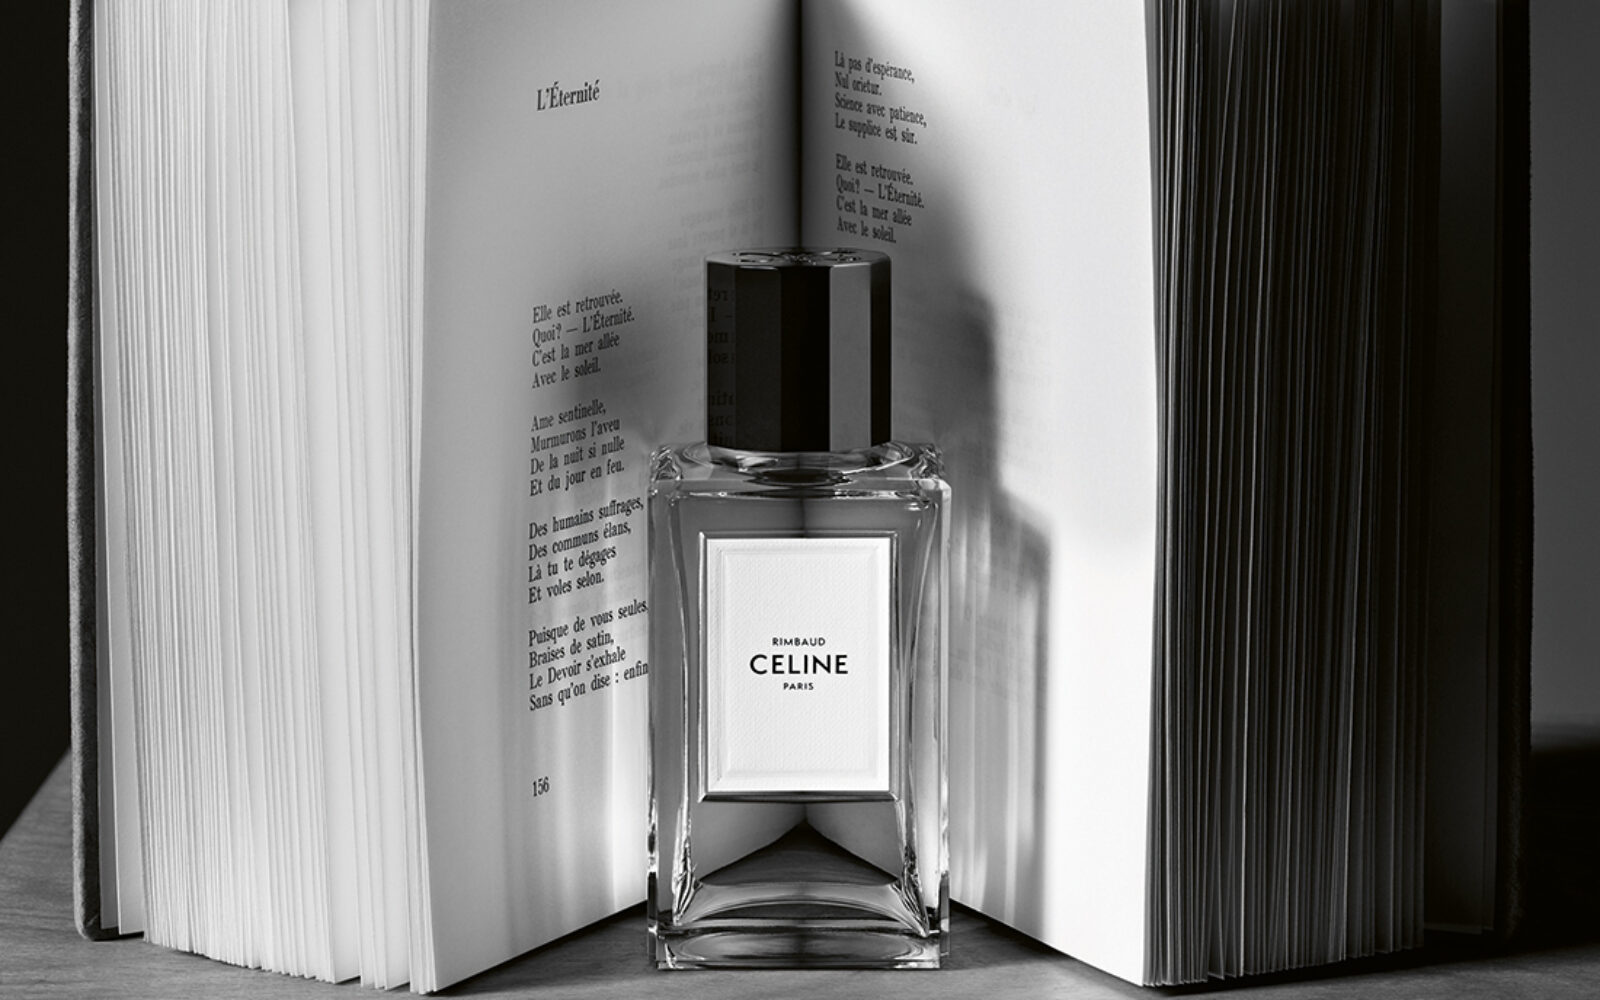 Bottle of Celine Rimbaud fragrance in front of an open book